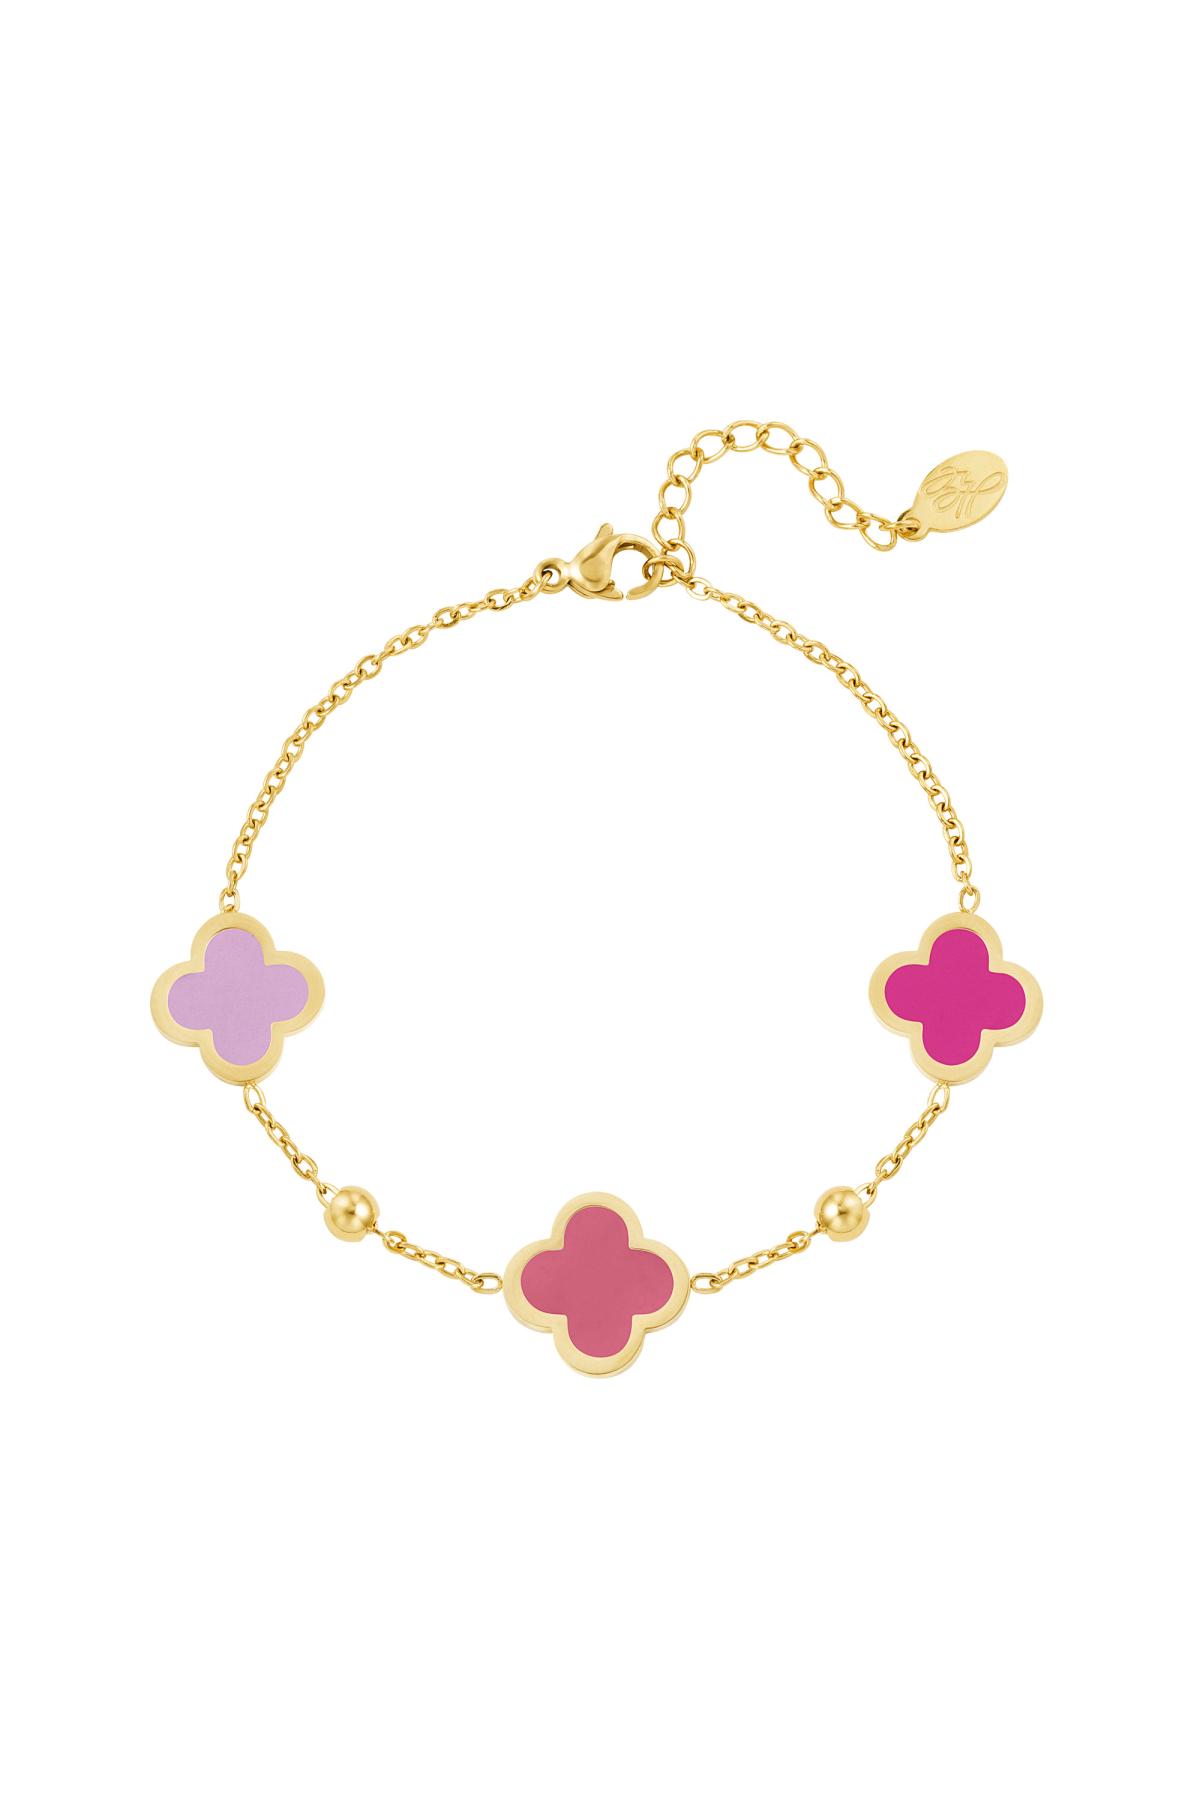 Bracelet three clovers Pink & Gold Stainless Steel h5 